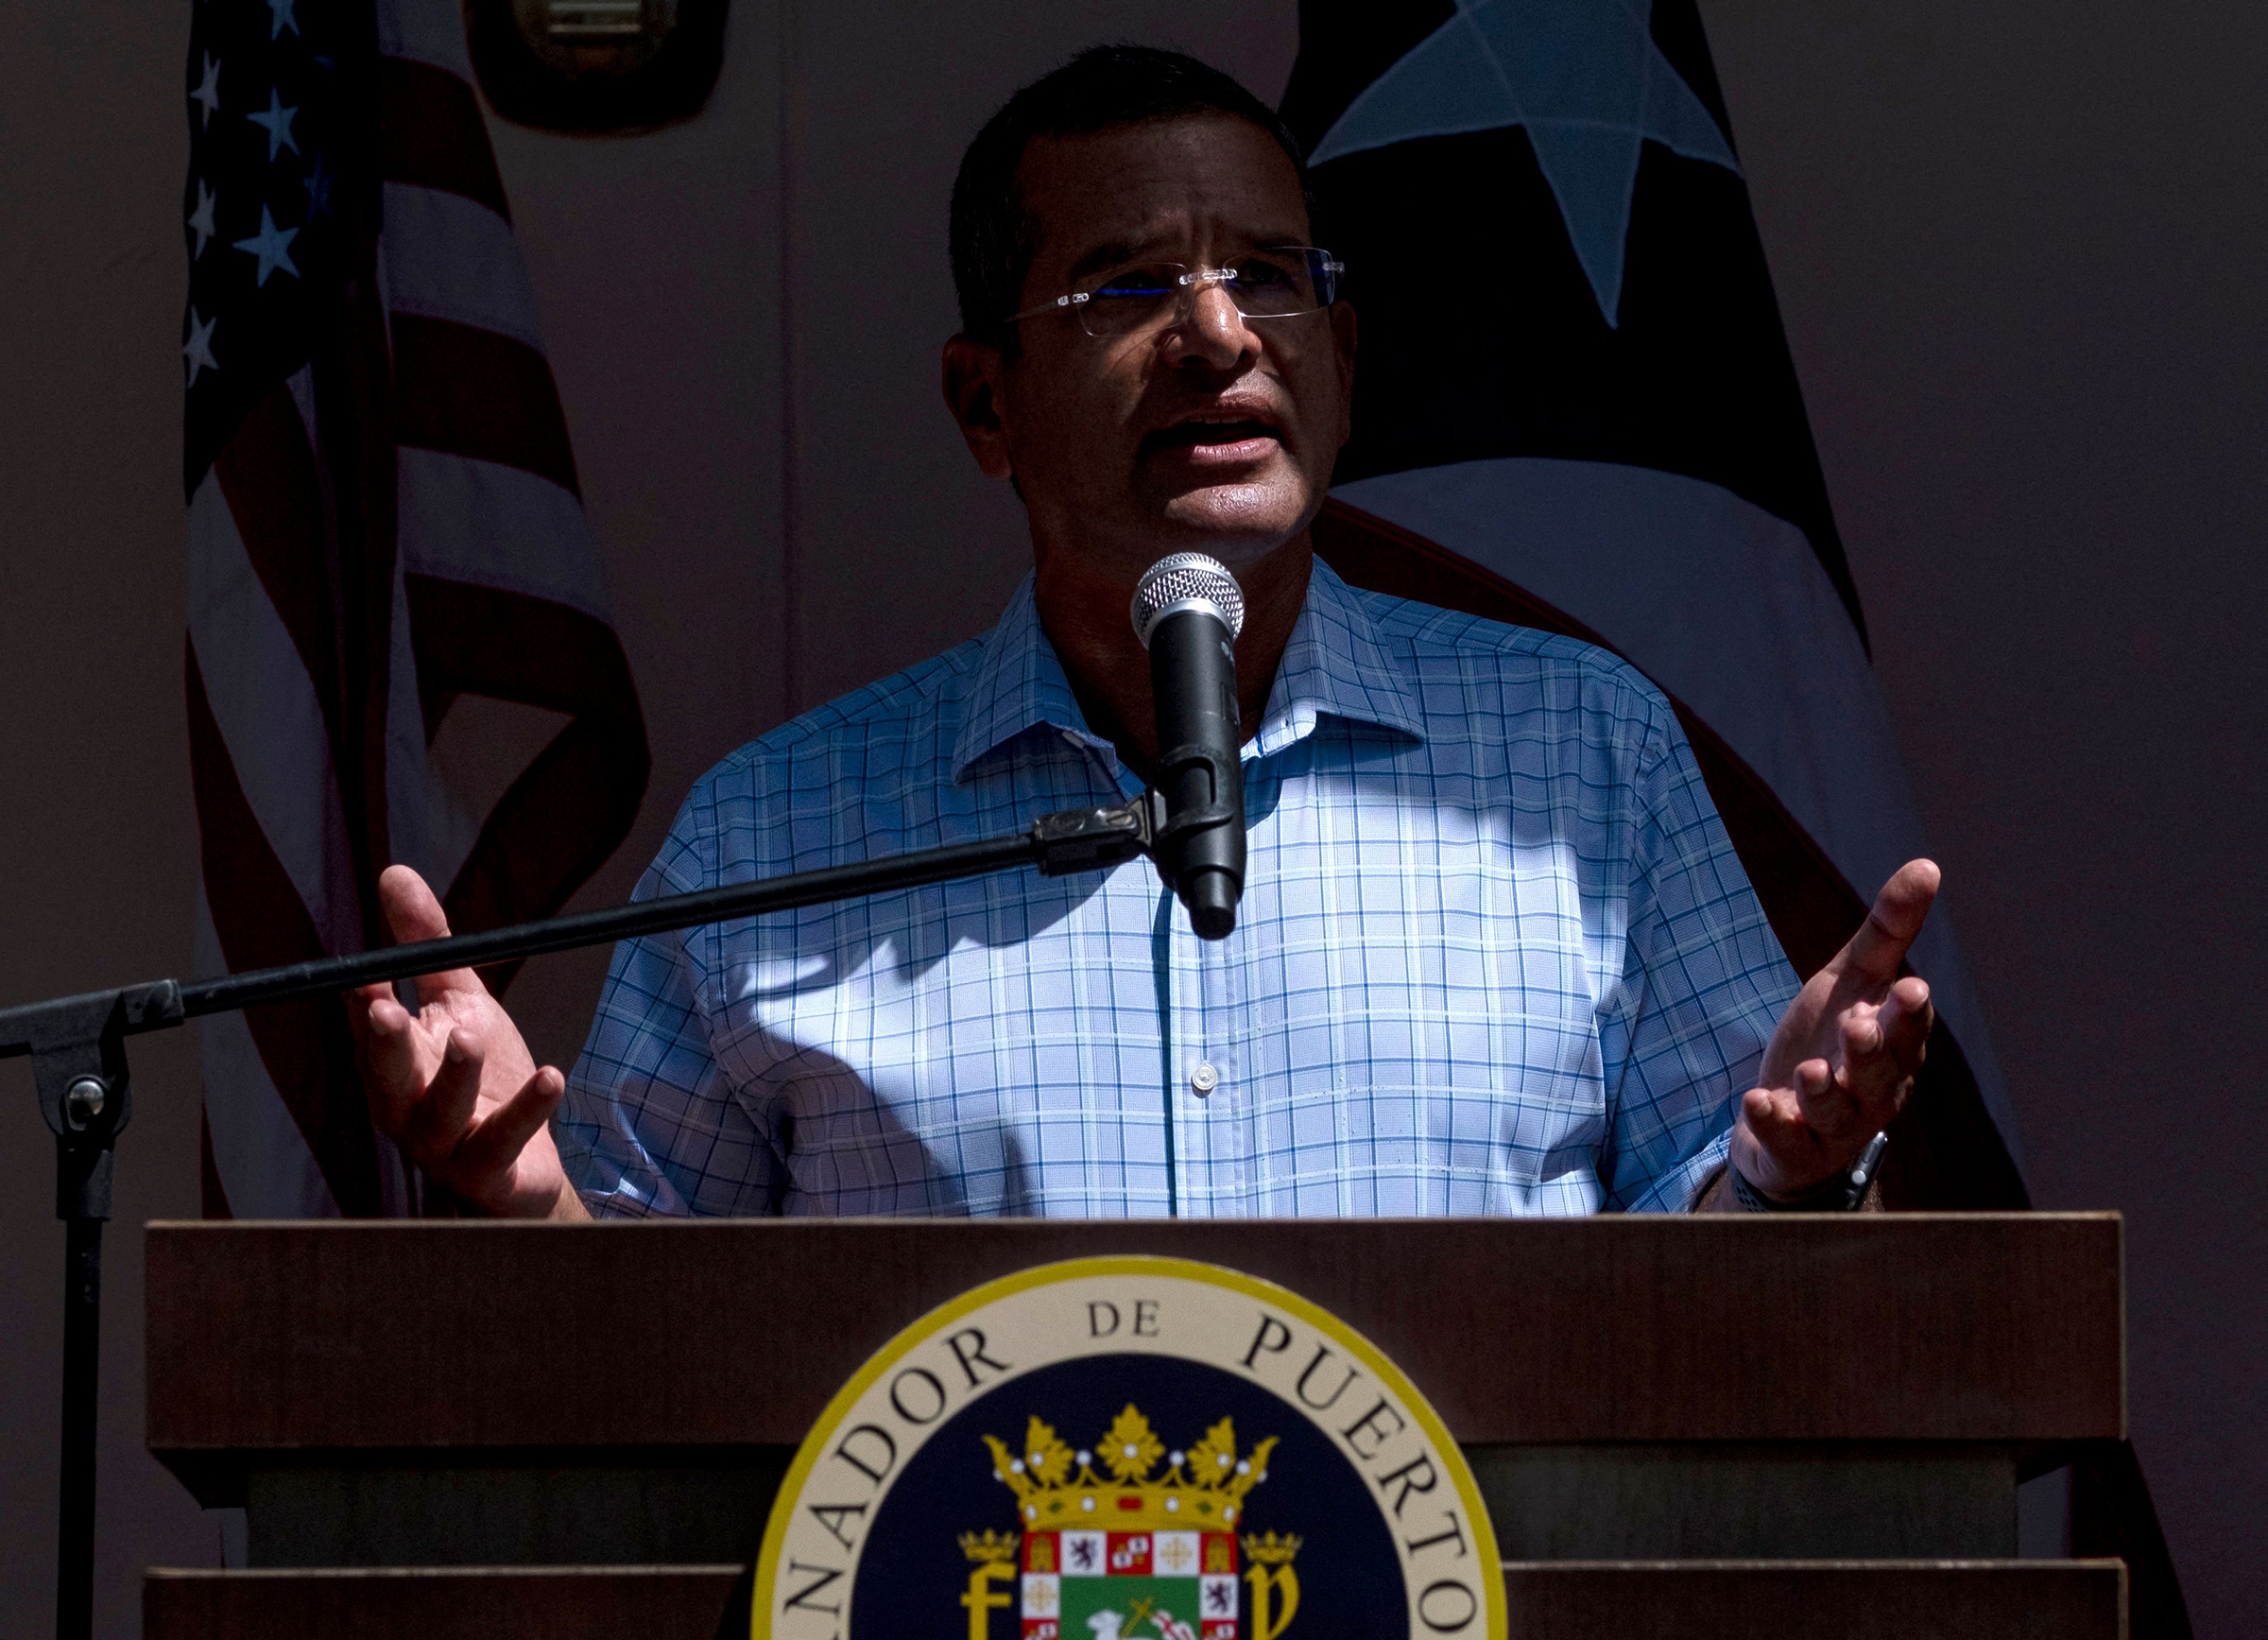 Puerto Rico's Governor Pedro Pierluisi speaks at a press conference at a Puerto Rico National Guard vaccination center on March 10. (Ricardo Arduengo—AFP/Getty Images)